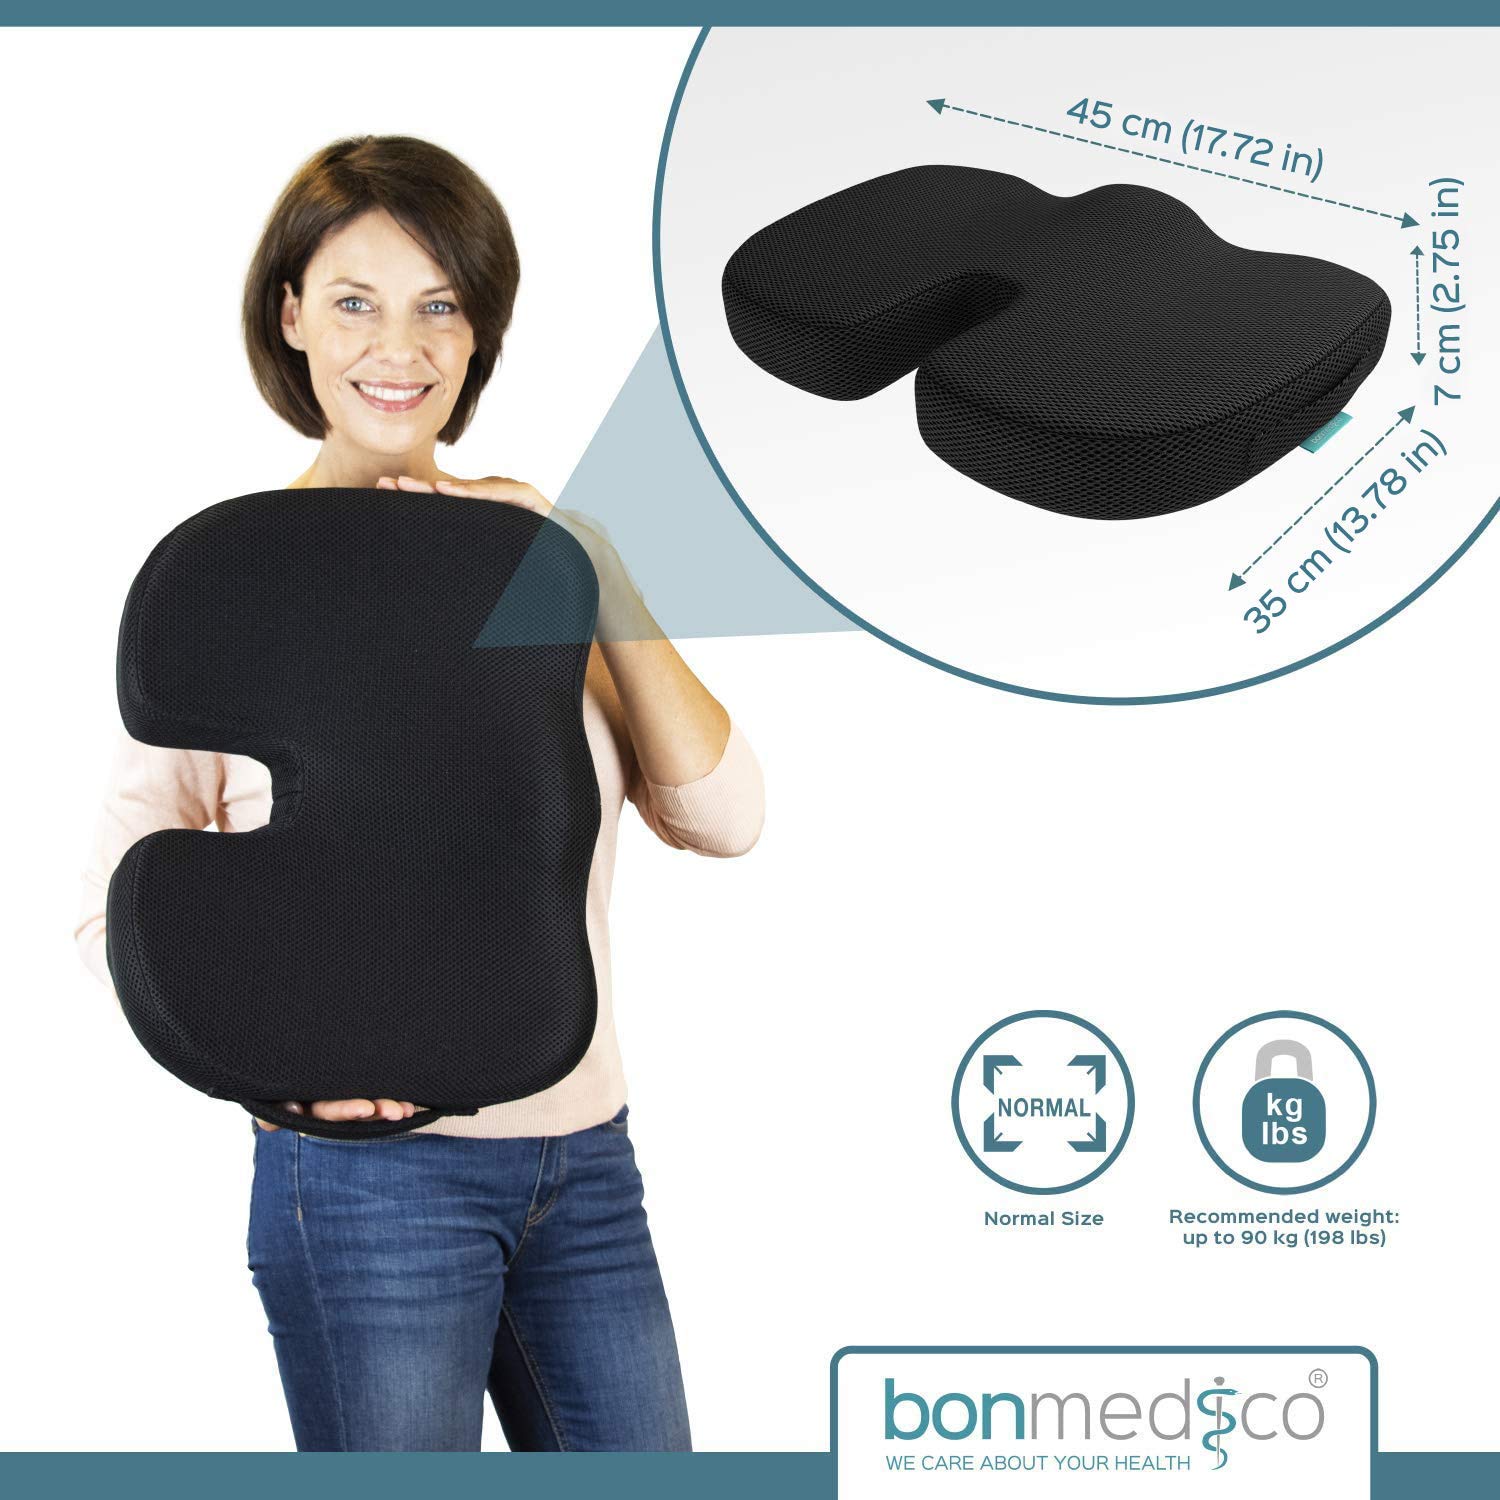 Benazcap X Large Memory Seat Cushion for Office Chair Pressure Relief